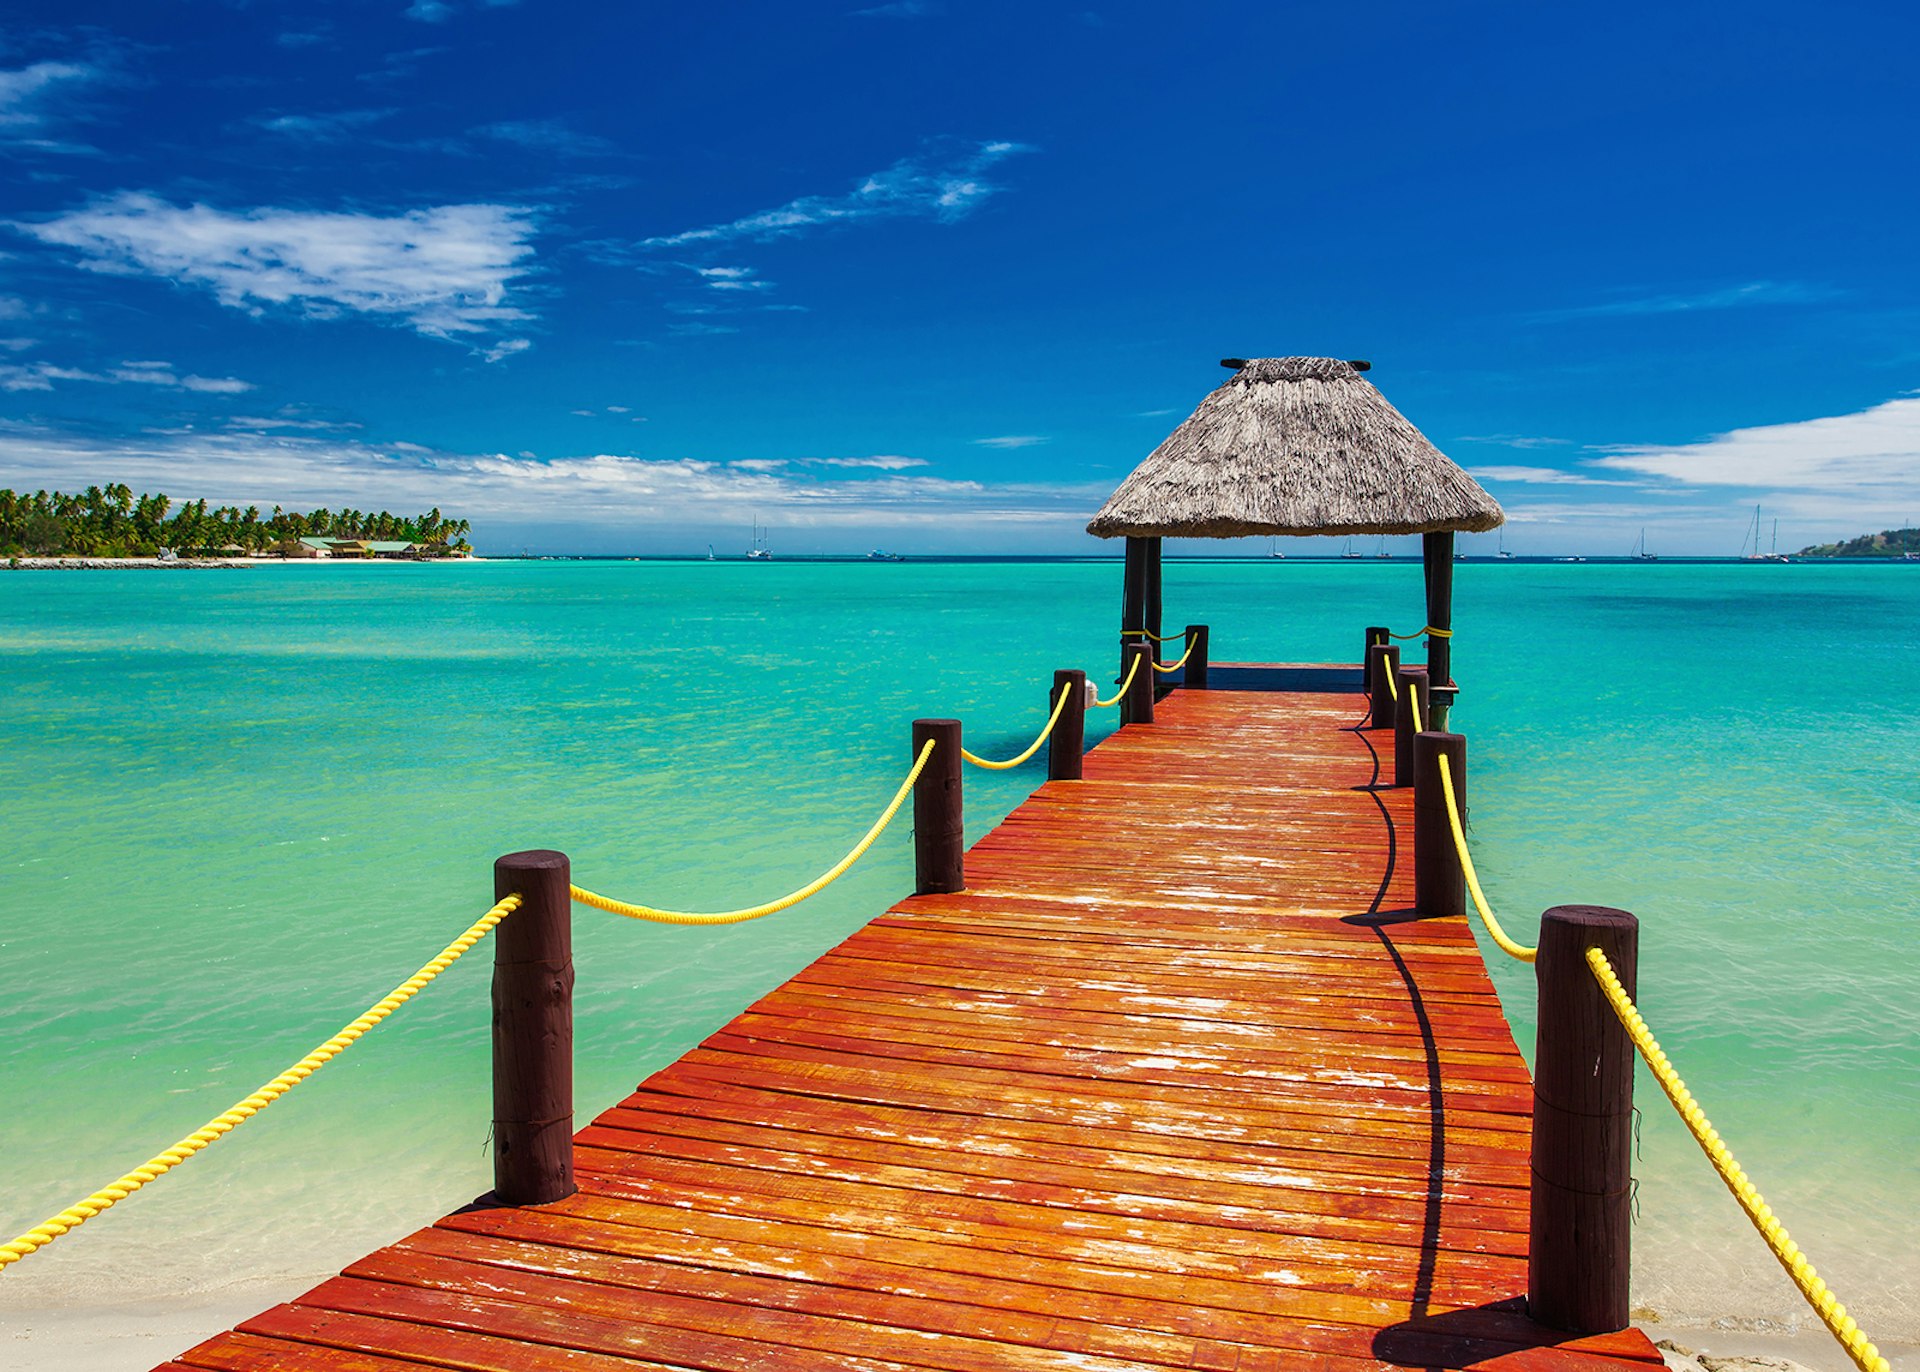 A wooden jetty extending to the tropical seas of Fiji ©  Martin Valigursky / Shutterstock